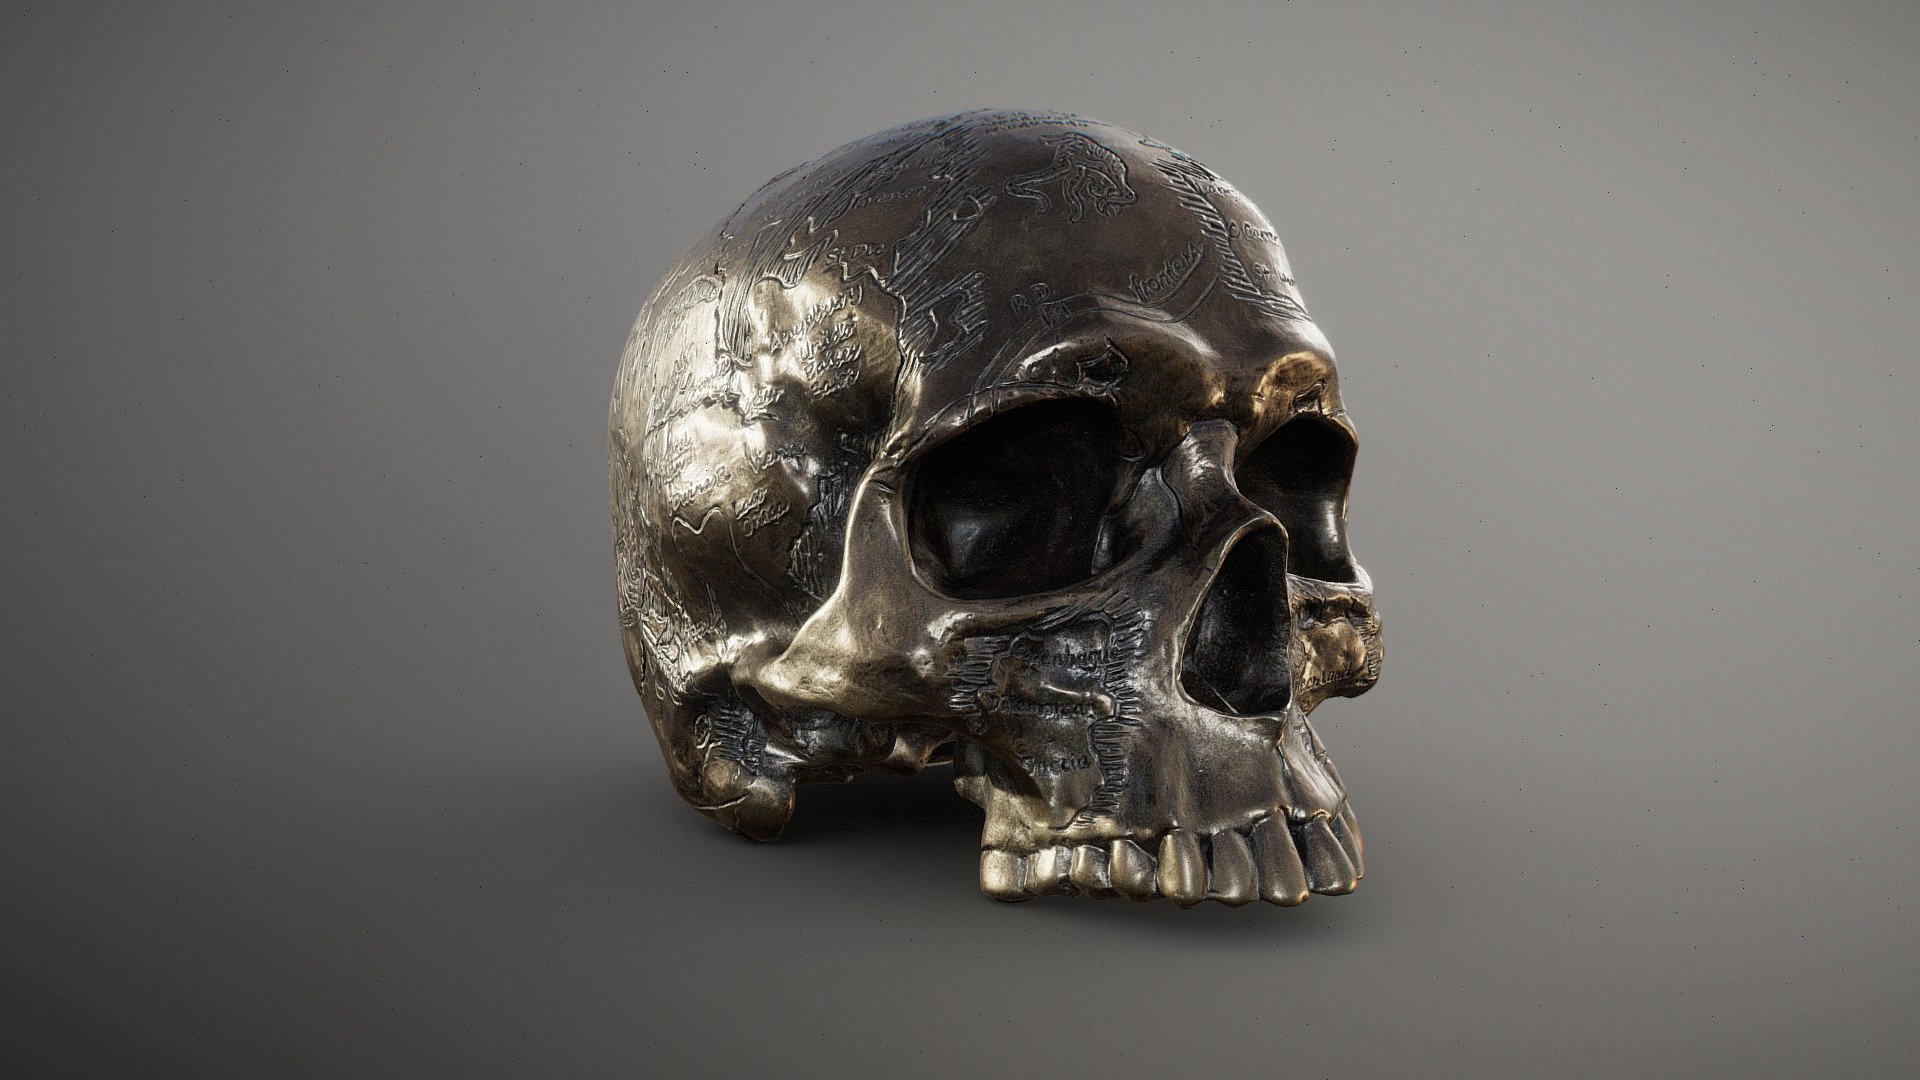 ** Bronze Treasure Skull Figurine **

Depicts a Secret Pirate Treasure Map and Navigation Symbols Carved Into an Old Skull, Giving it the Look of an Ancient Relic.

12.1 x 18.1 x 13.1 cm (44 micrometers per texel @ 8k)

Scanned using advanced technology developed by inciprocal Inc. that enables highly photo-realistic reproduction of real-world products in virtual environments. Our hardware and software technology combines advanced photometry, structured light, photogrammtery and light fields to capture and generate accurate material representations from tens of thousands of images targeting real-time and offline path-traced PBR compatible renderers.

Zip file includes low-poly OBJ mesh (in meters) with a set of 8k PBR textures compressed with lossless JPEG (no chroma sub-sampling) 3d model